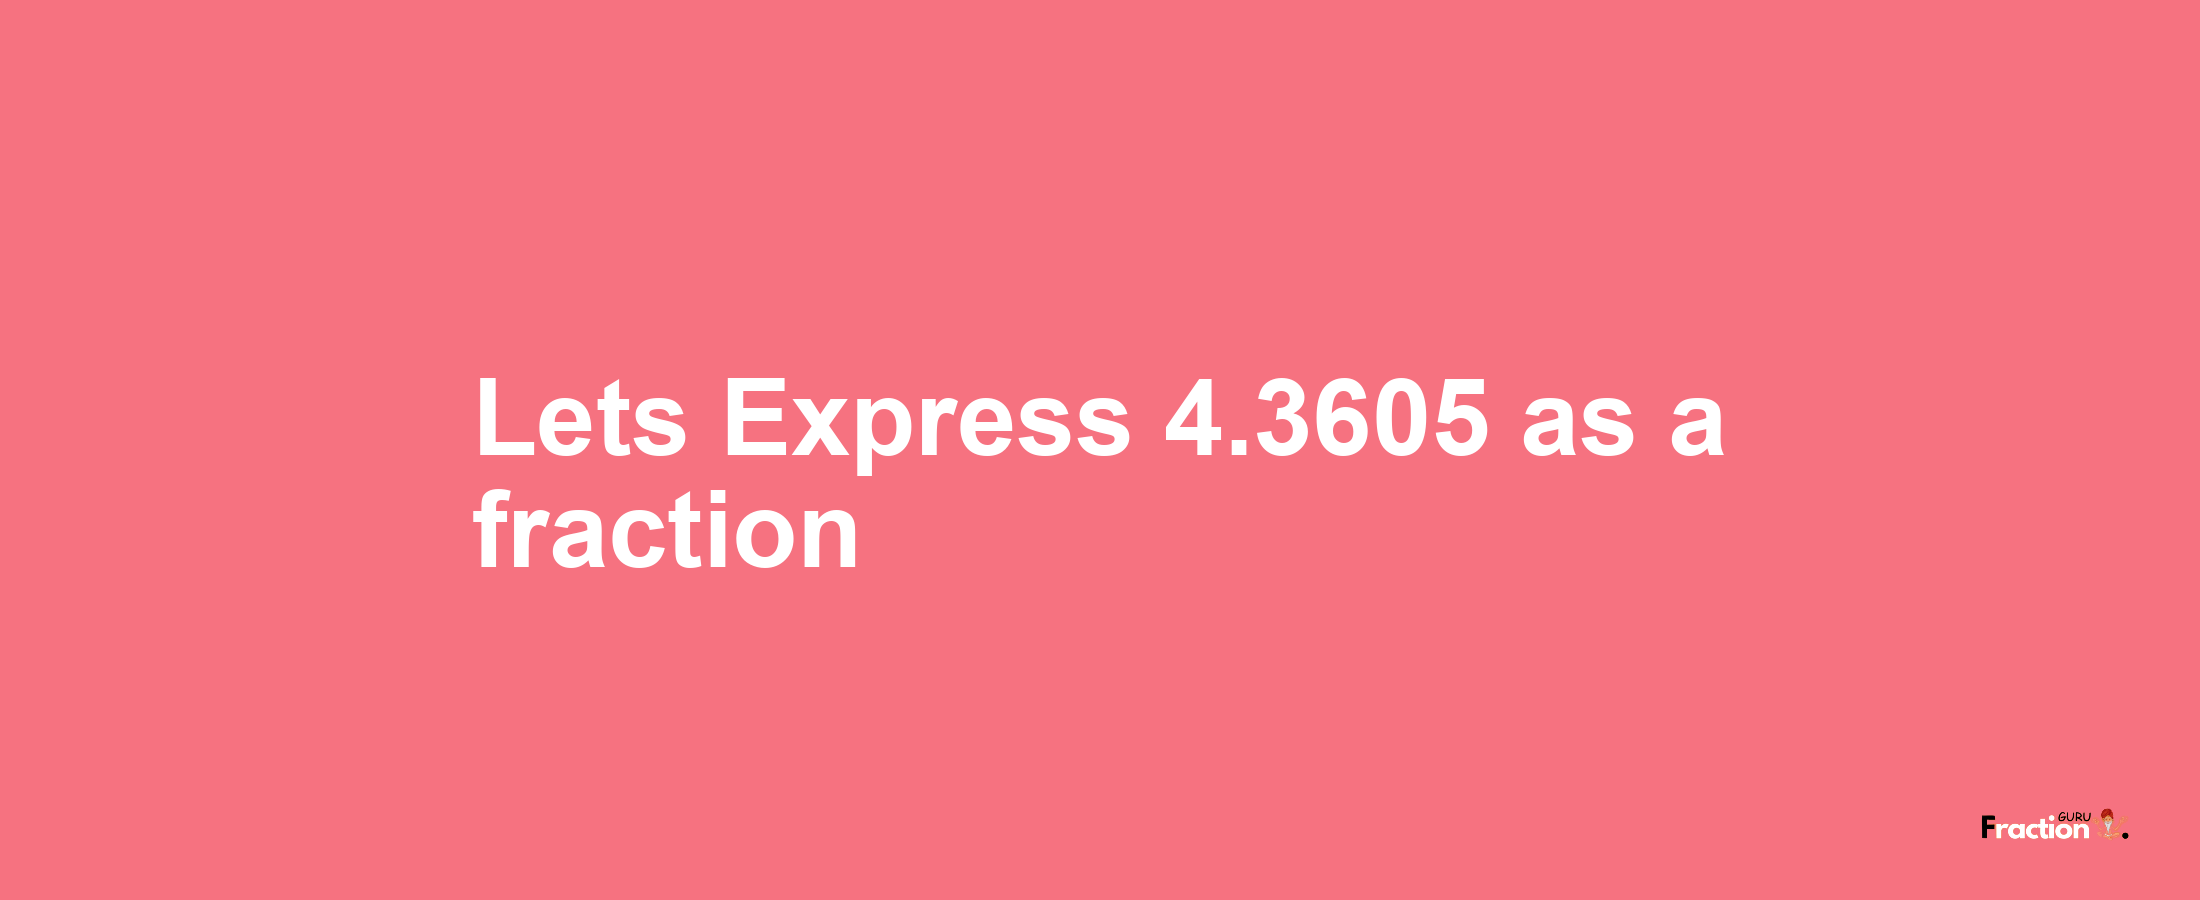 Lets Express 4.3605 as afraction